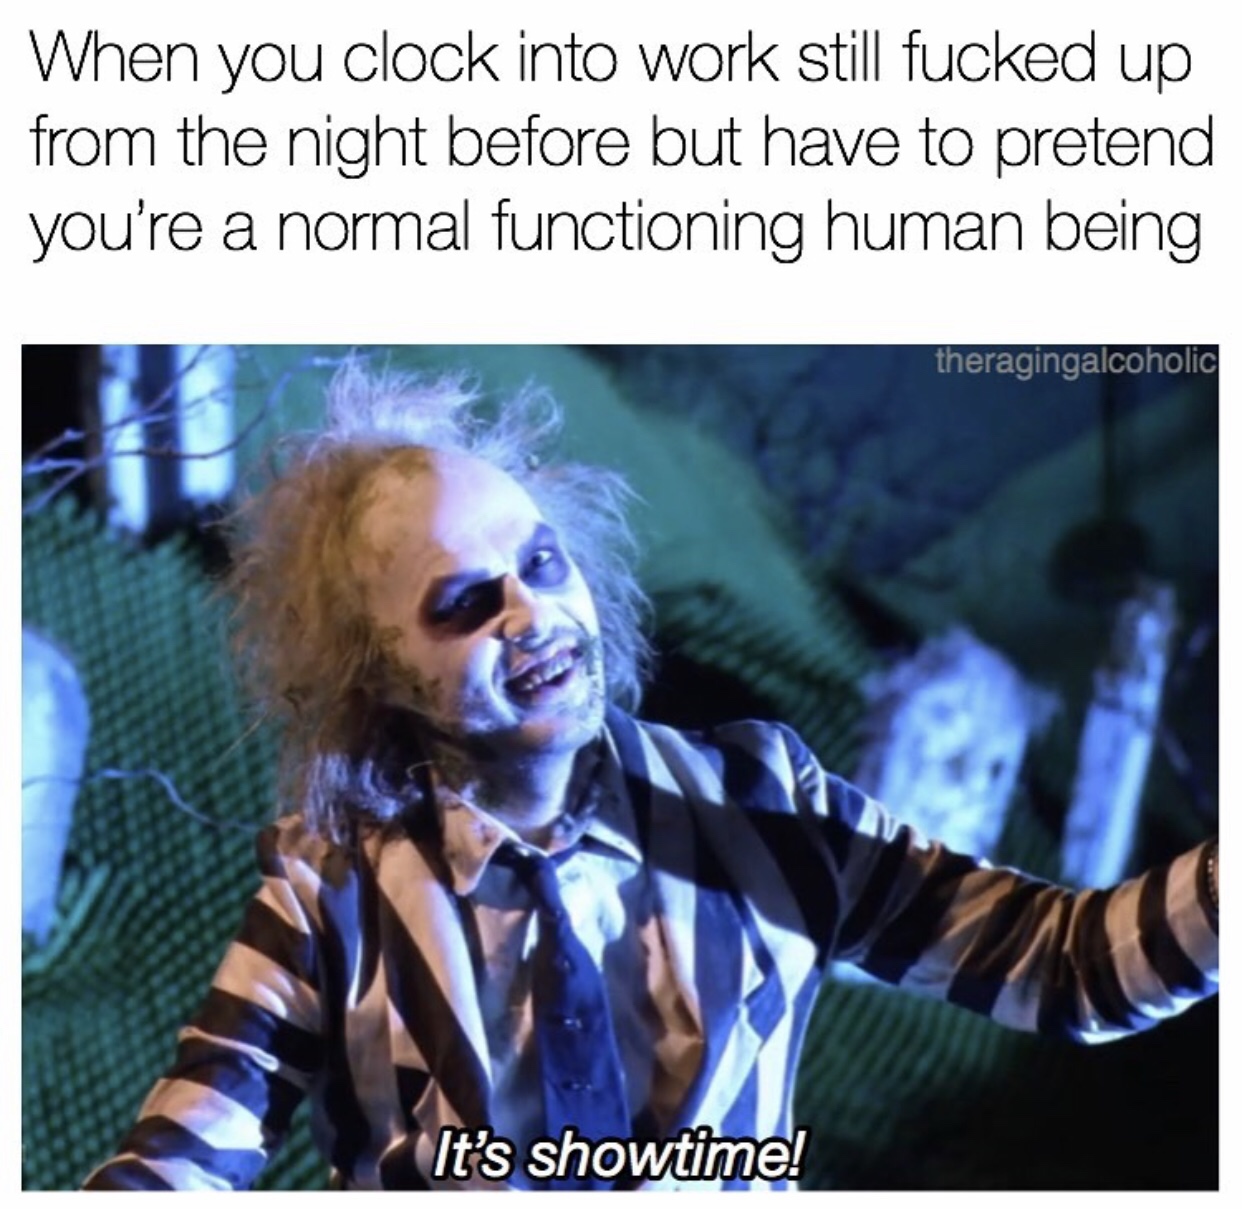 beetlejuice screenshot - When you clock into work still fucked up from the night before but have to pretend you're a normal functioning human being theragingalcoholic ? It's showtime!